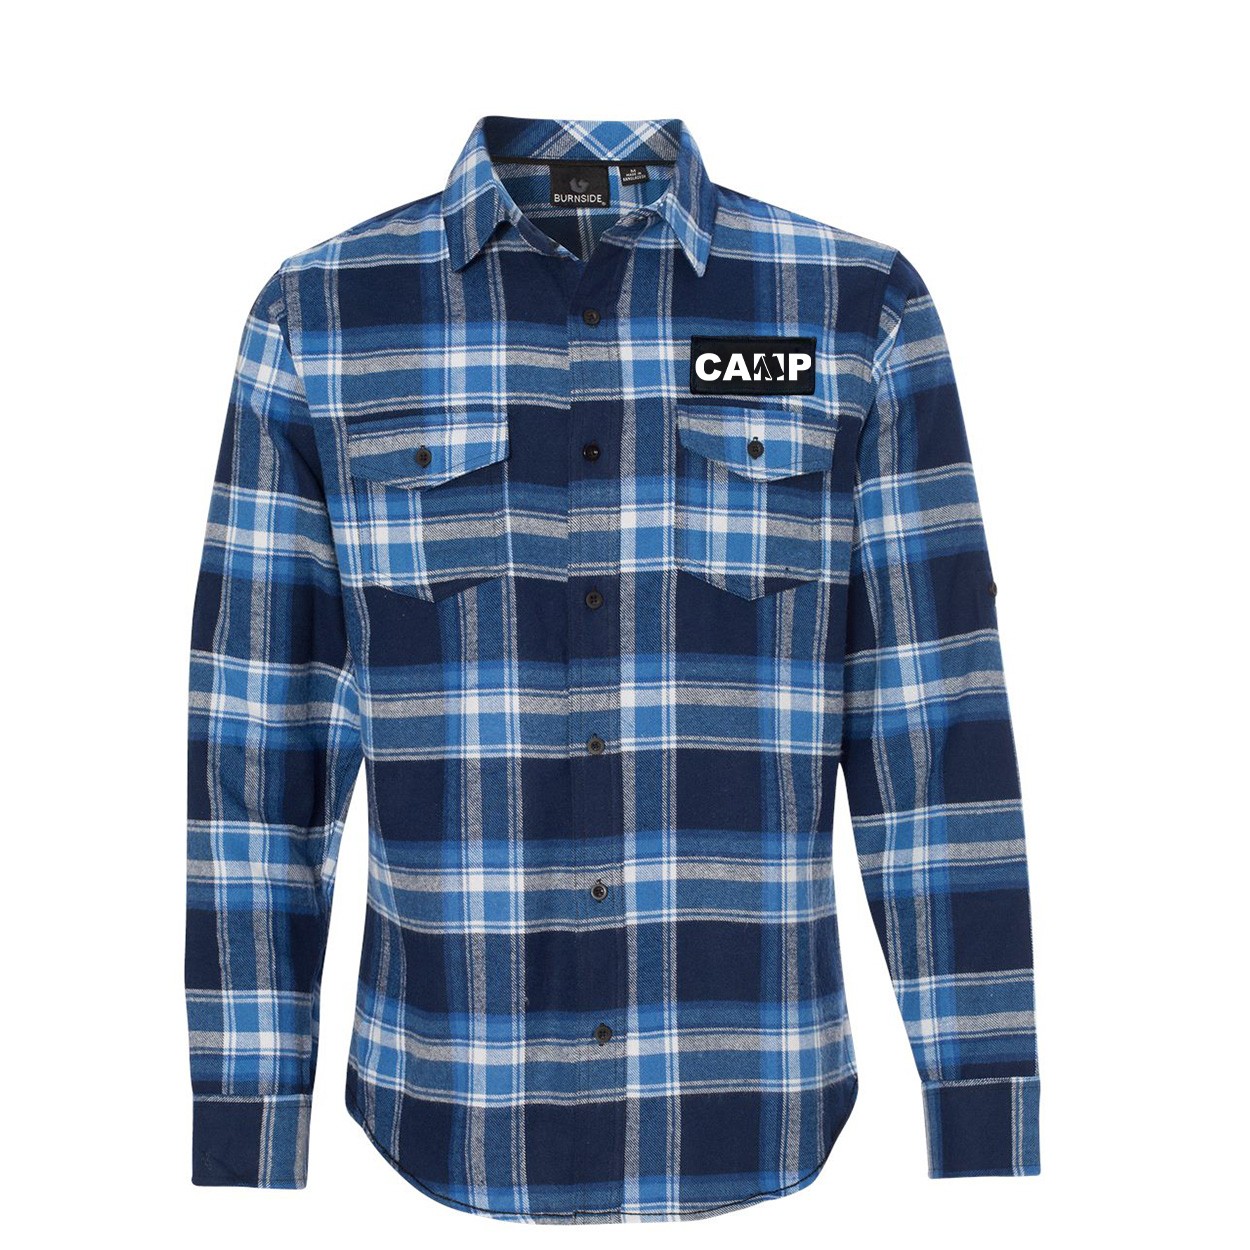 Camp Tent Logo Classic Unisex Long Sleeve Woven Patch Flannel Shirt Blue/White (White Logo)